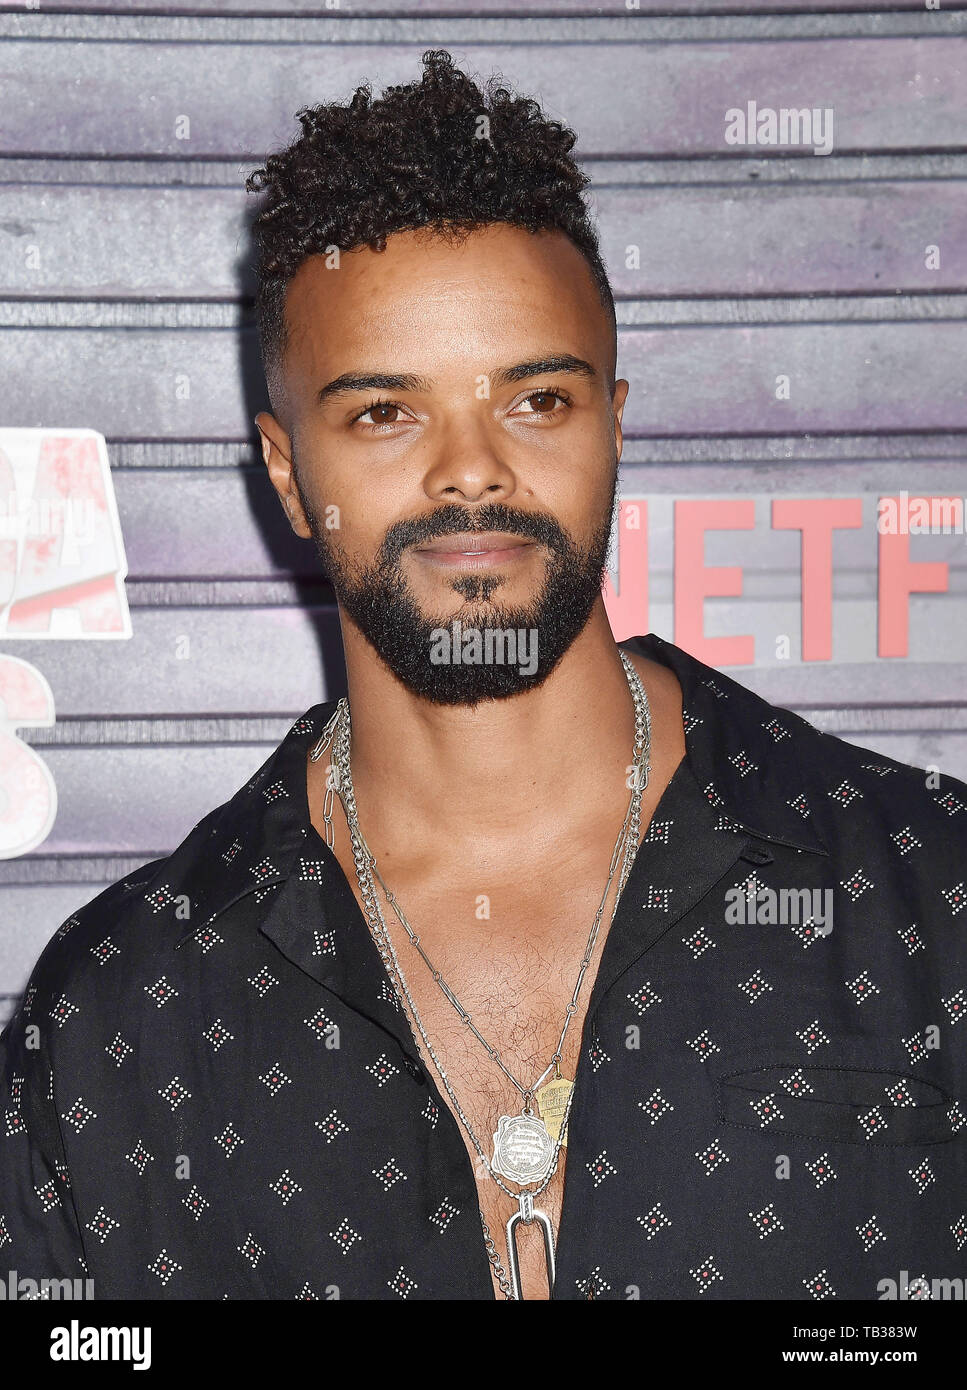 HOLLYWOOD, CA - MAY 28: Eka Darville attends a Special Screening Of Netflix's 'Jessica Jones' Season 3 at ArcLight Hollywood on May 28, 2019 in Hollywood, California. Stock Photo